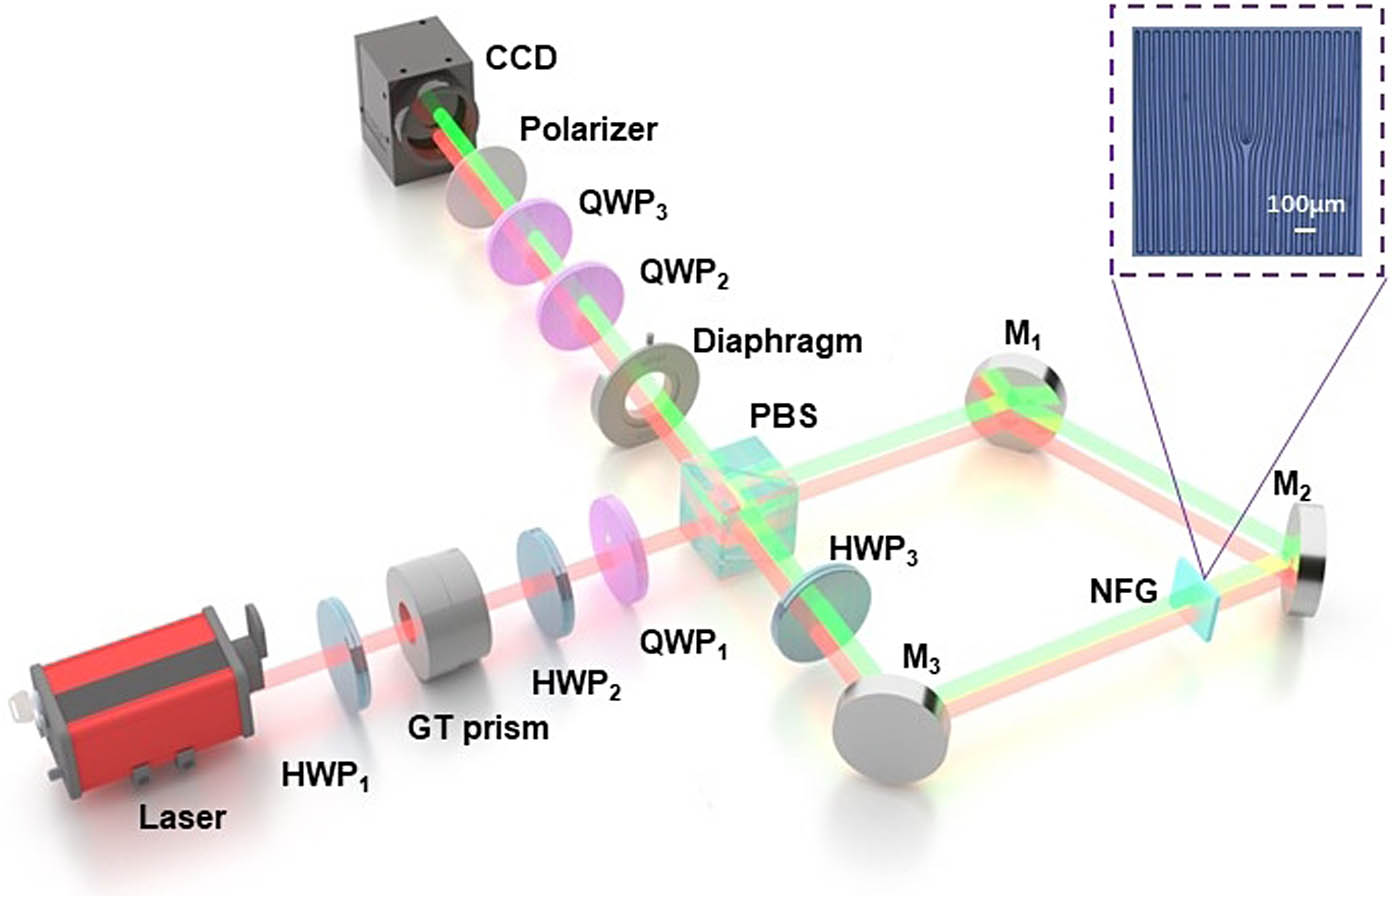 Schematic of the experimental setup. GT prism, Glan–Taylor prism; HWP1, HWP2, and HWP3, half-wave plates; QWP1, QWP2, and QWP3, quarter-wave plates; PBS, polarized beam splitter; NFG, nonlinear fork grating; M1, M2, and M3, mirrors; CCD, charge-coupled device. Inset shows the microscope image of fork grating etched on the LN surface.